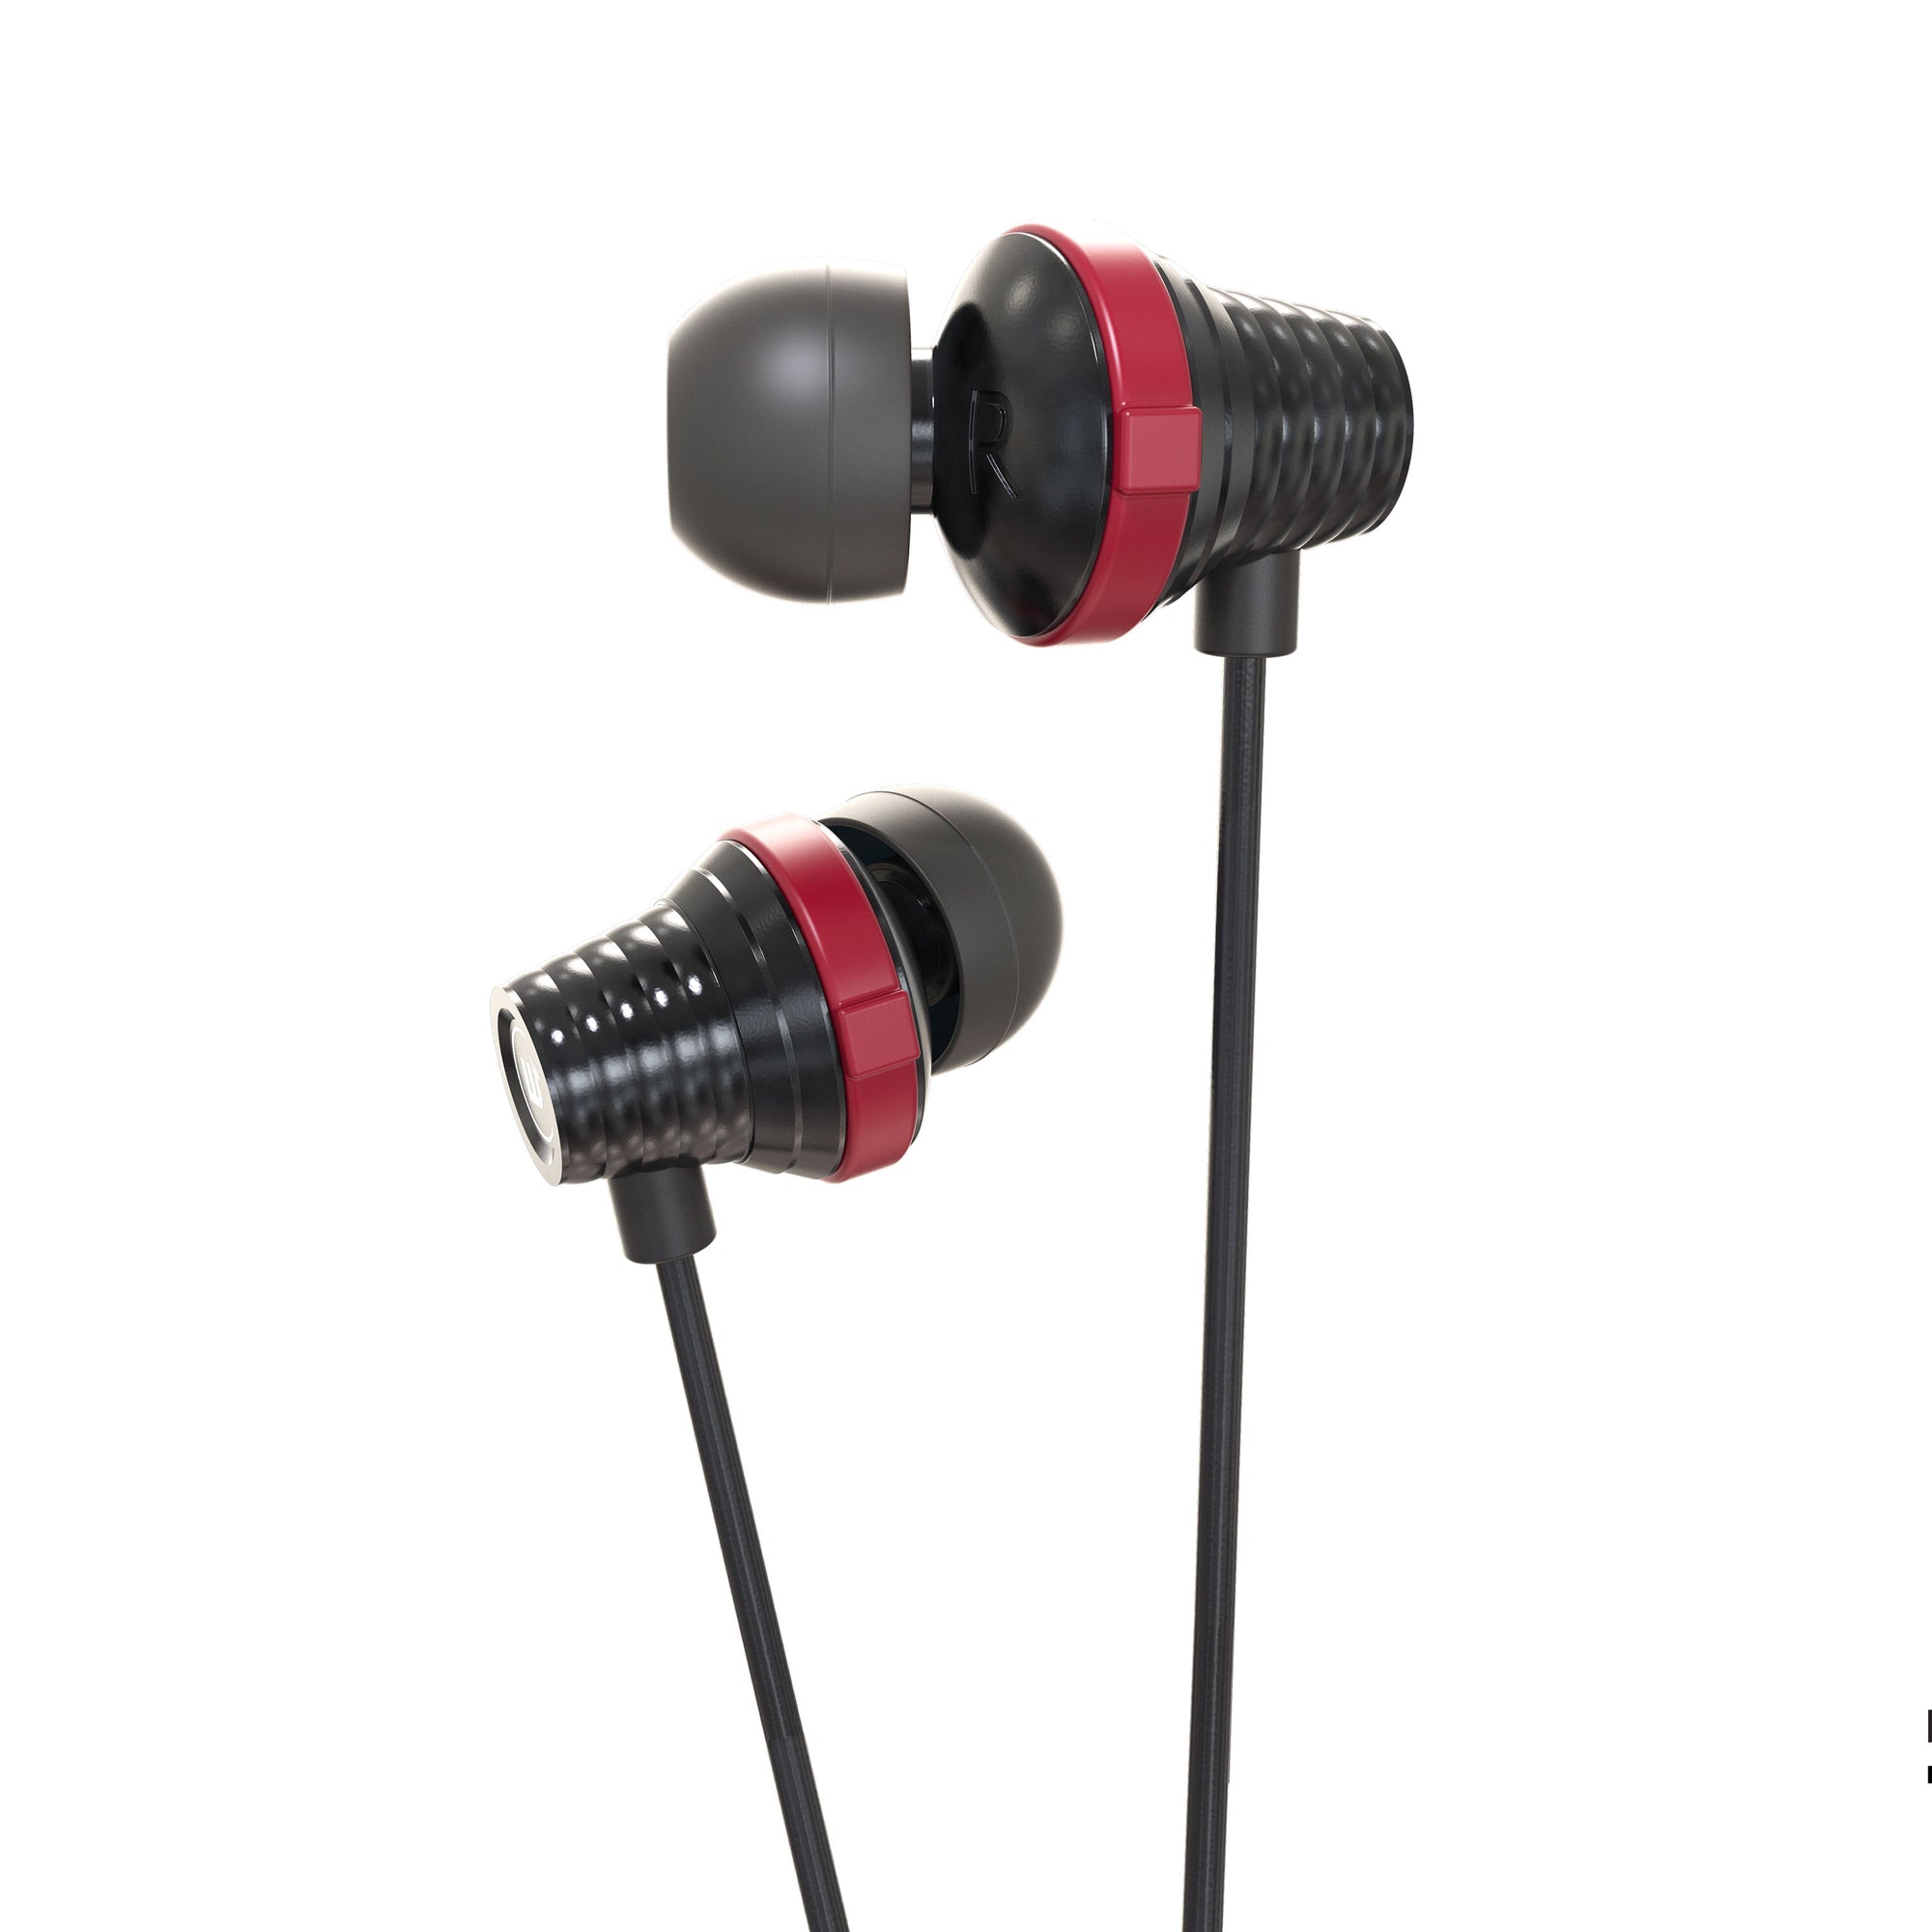 Zeta Wired Earbud Earphones With Remote & Microphone